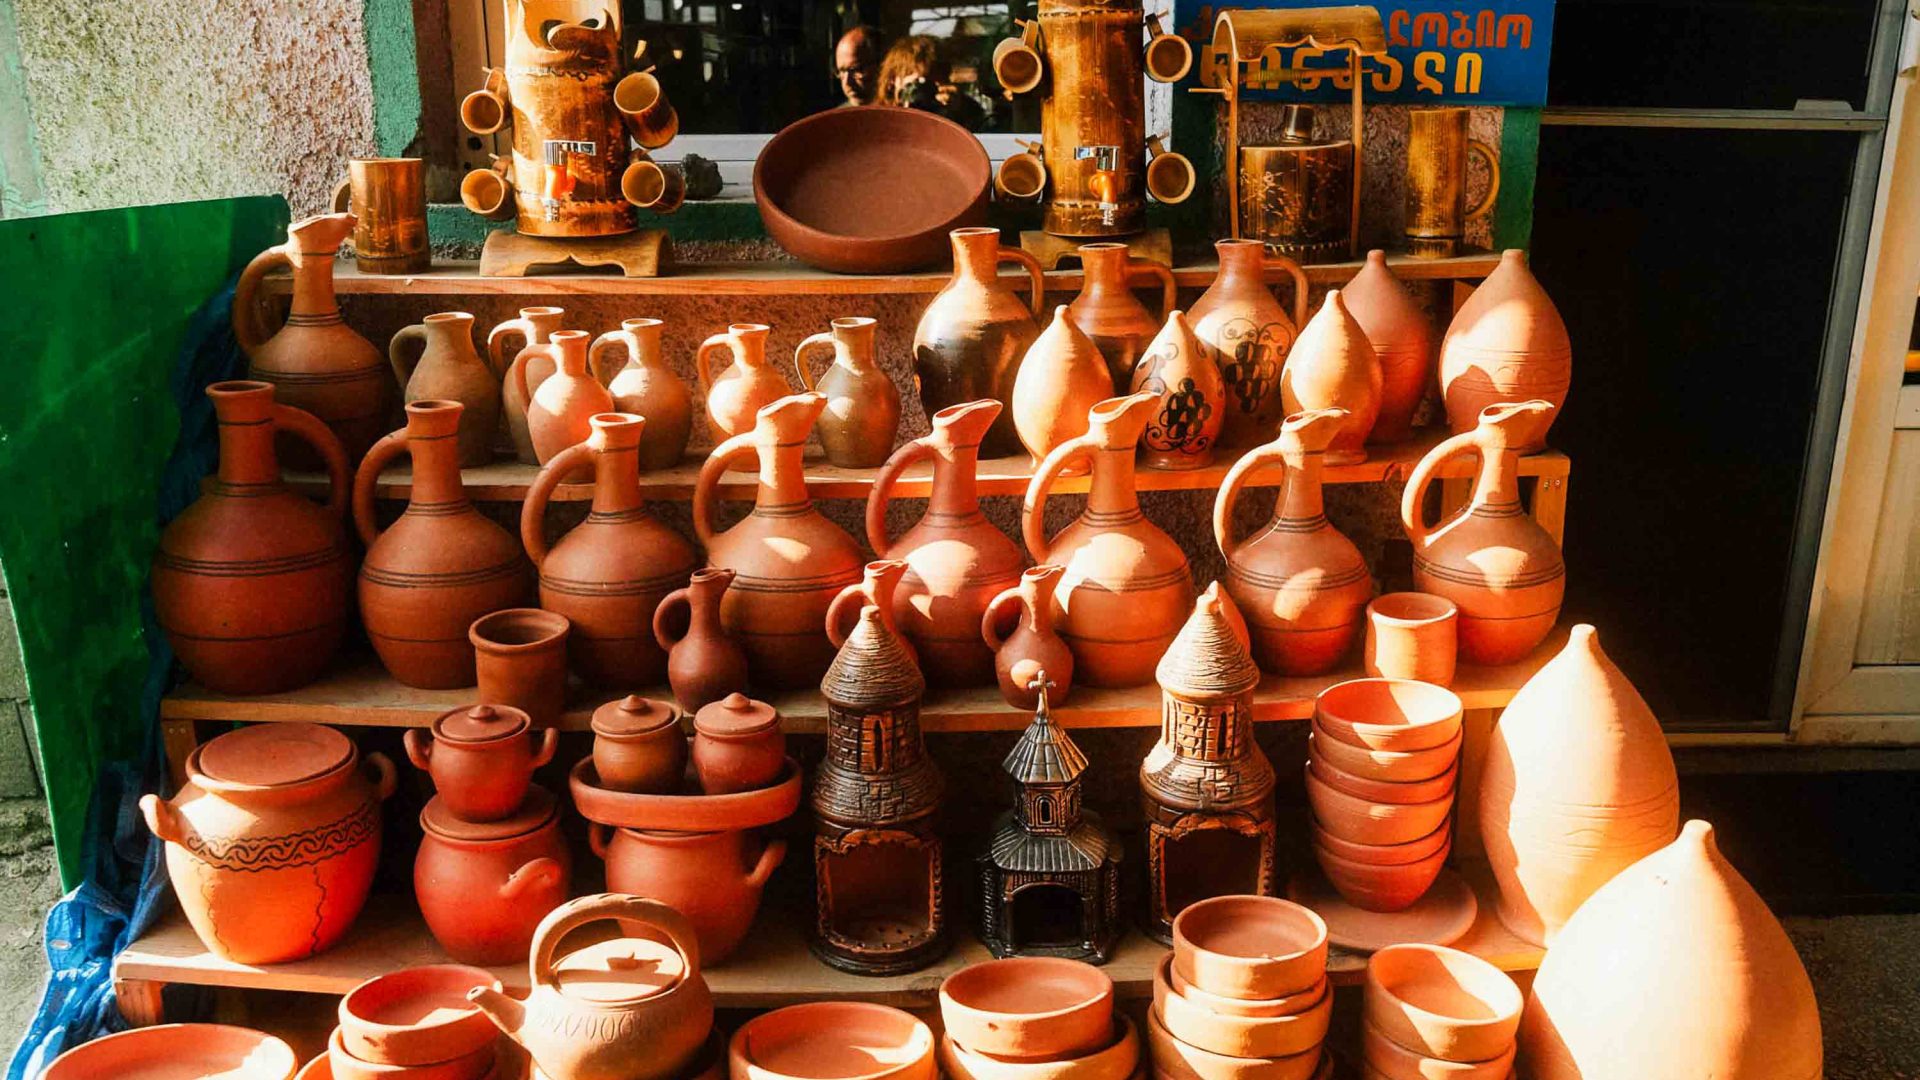 A market display of clay jugs.